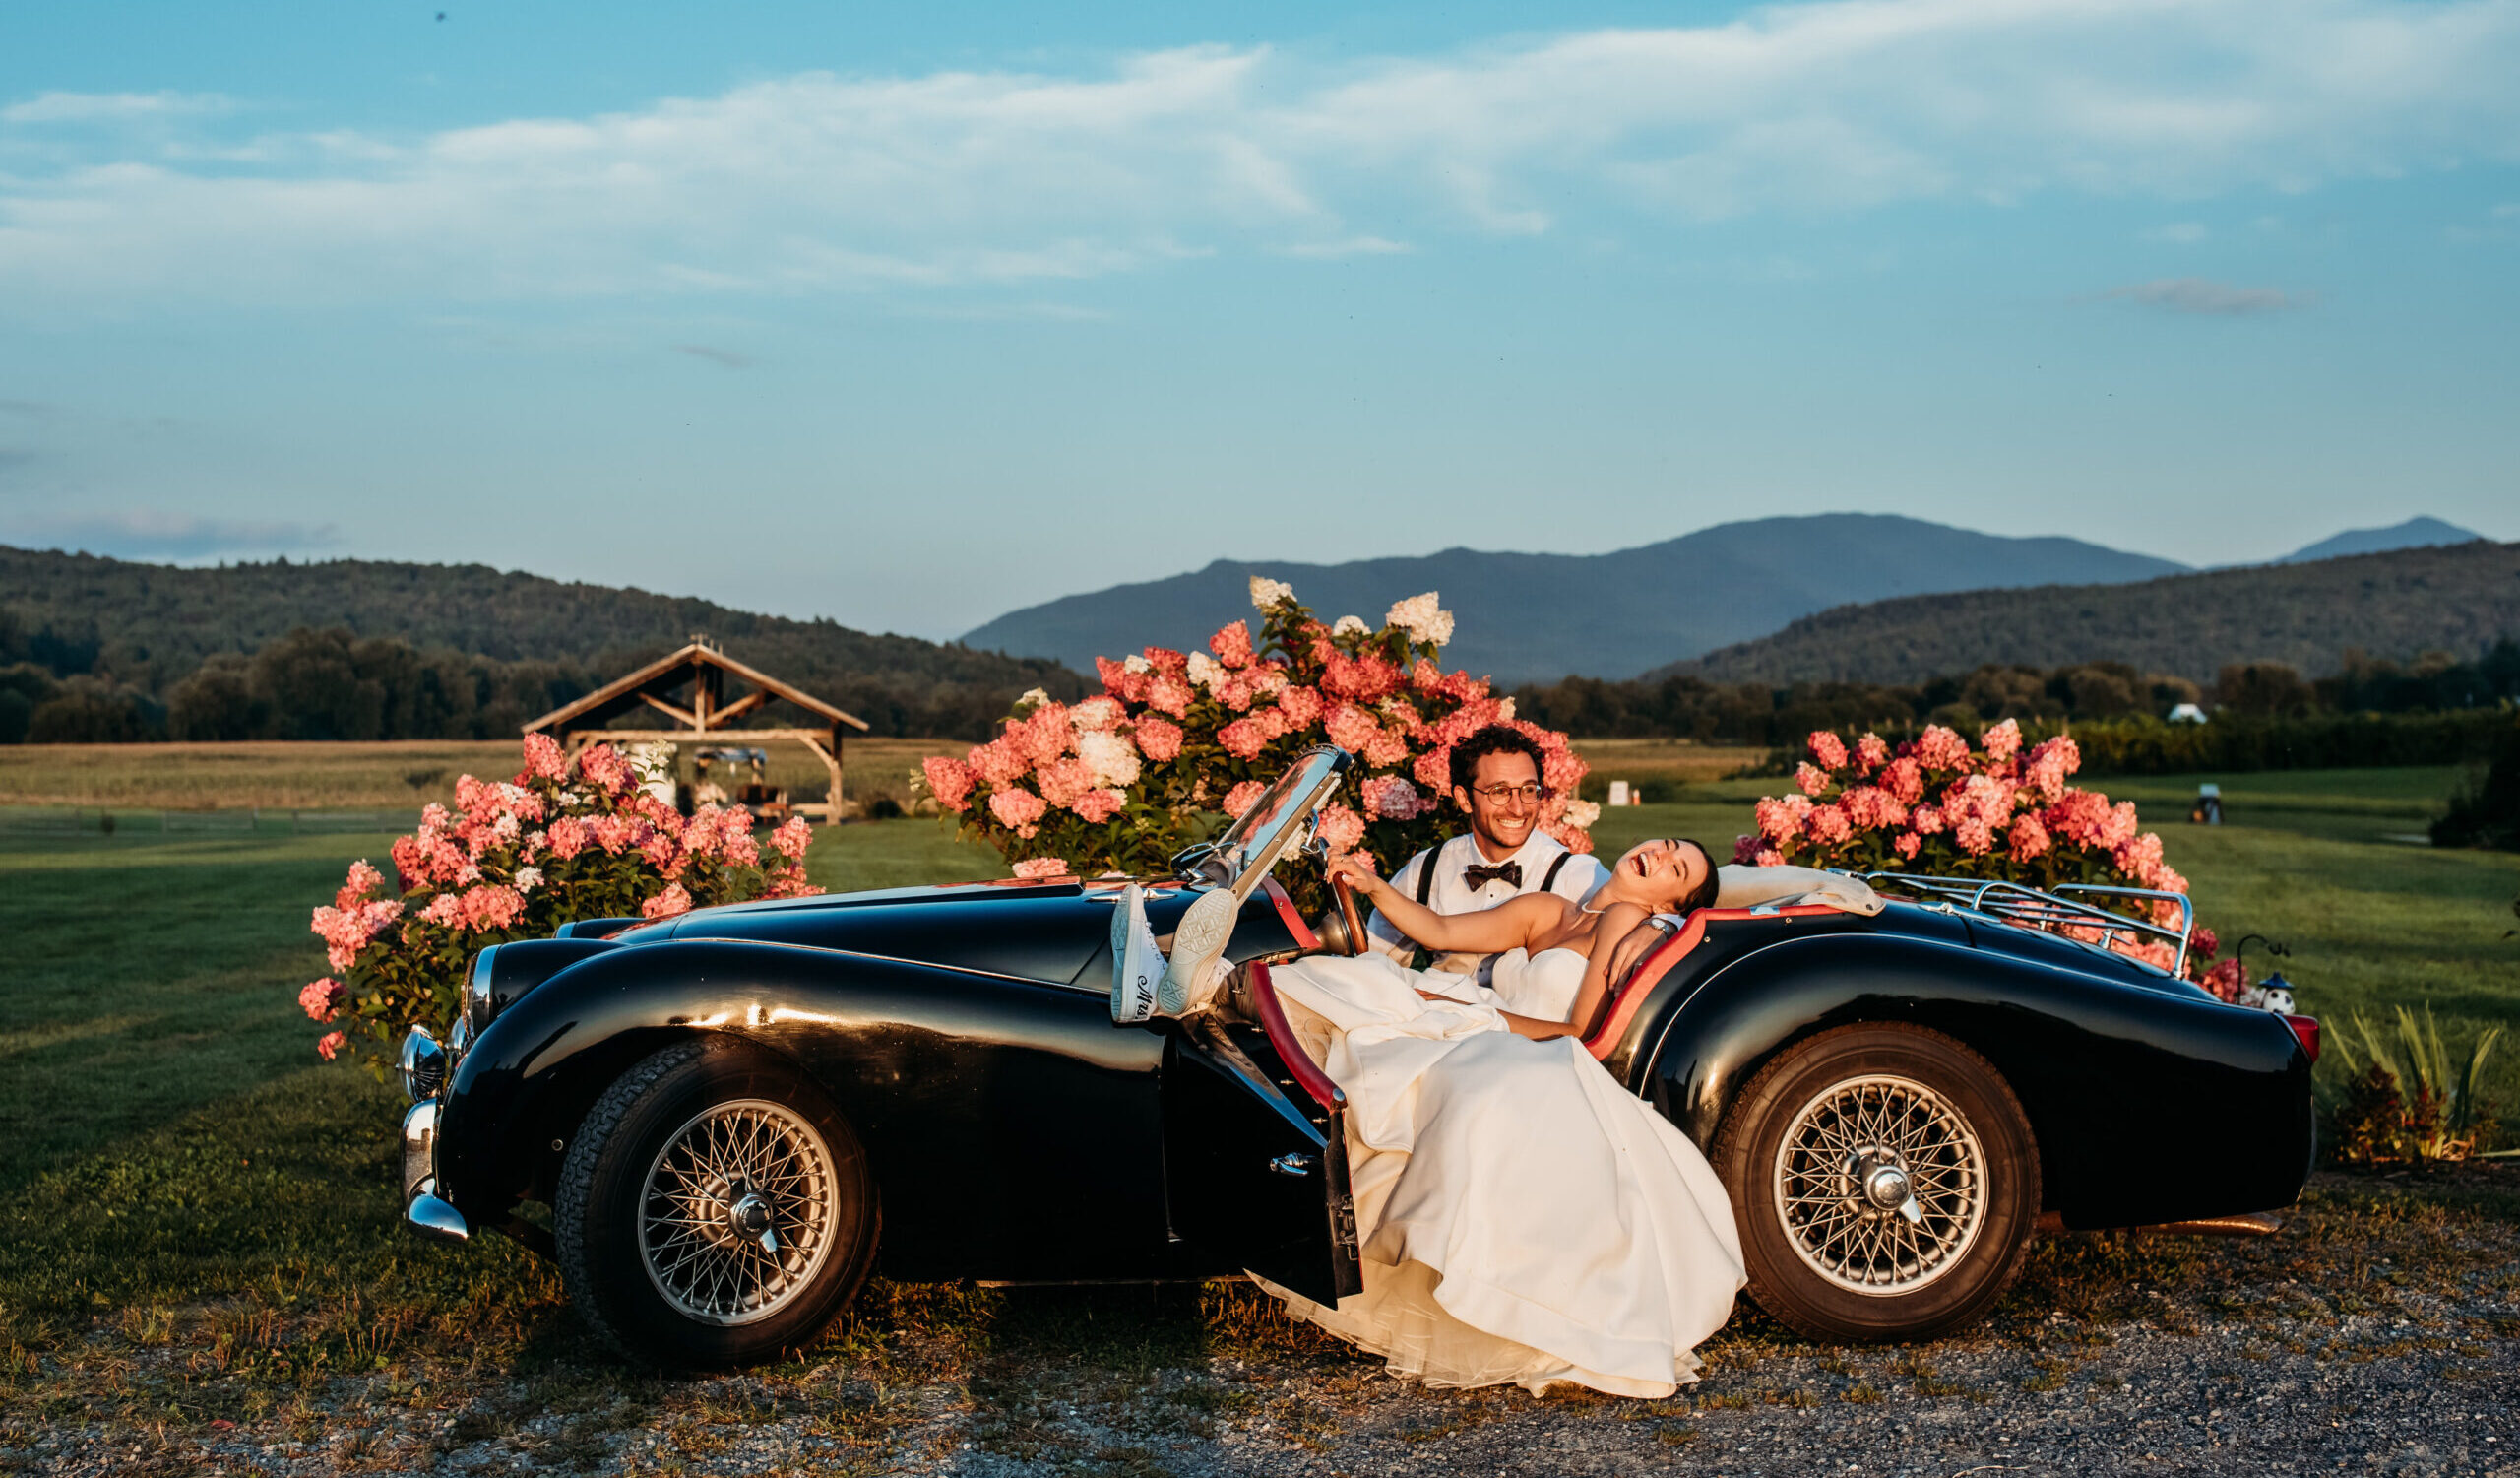 The bride and groom laughing and sitting together in a vintage car with mountain views behind them at their rustic wedding venue in Vermont